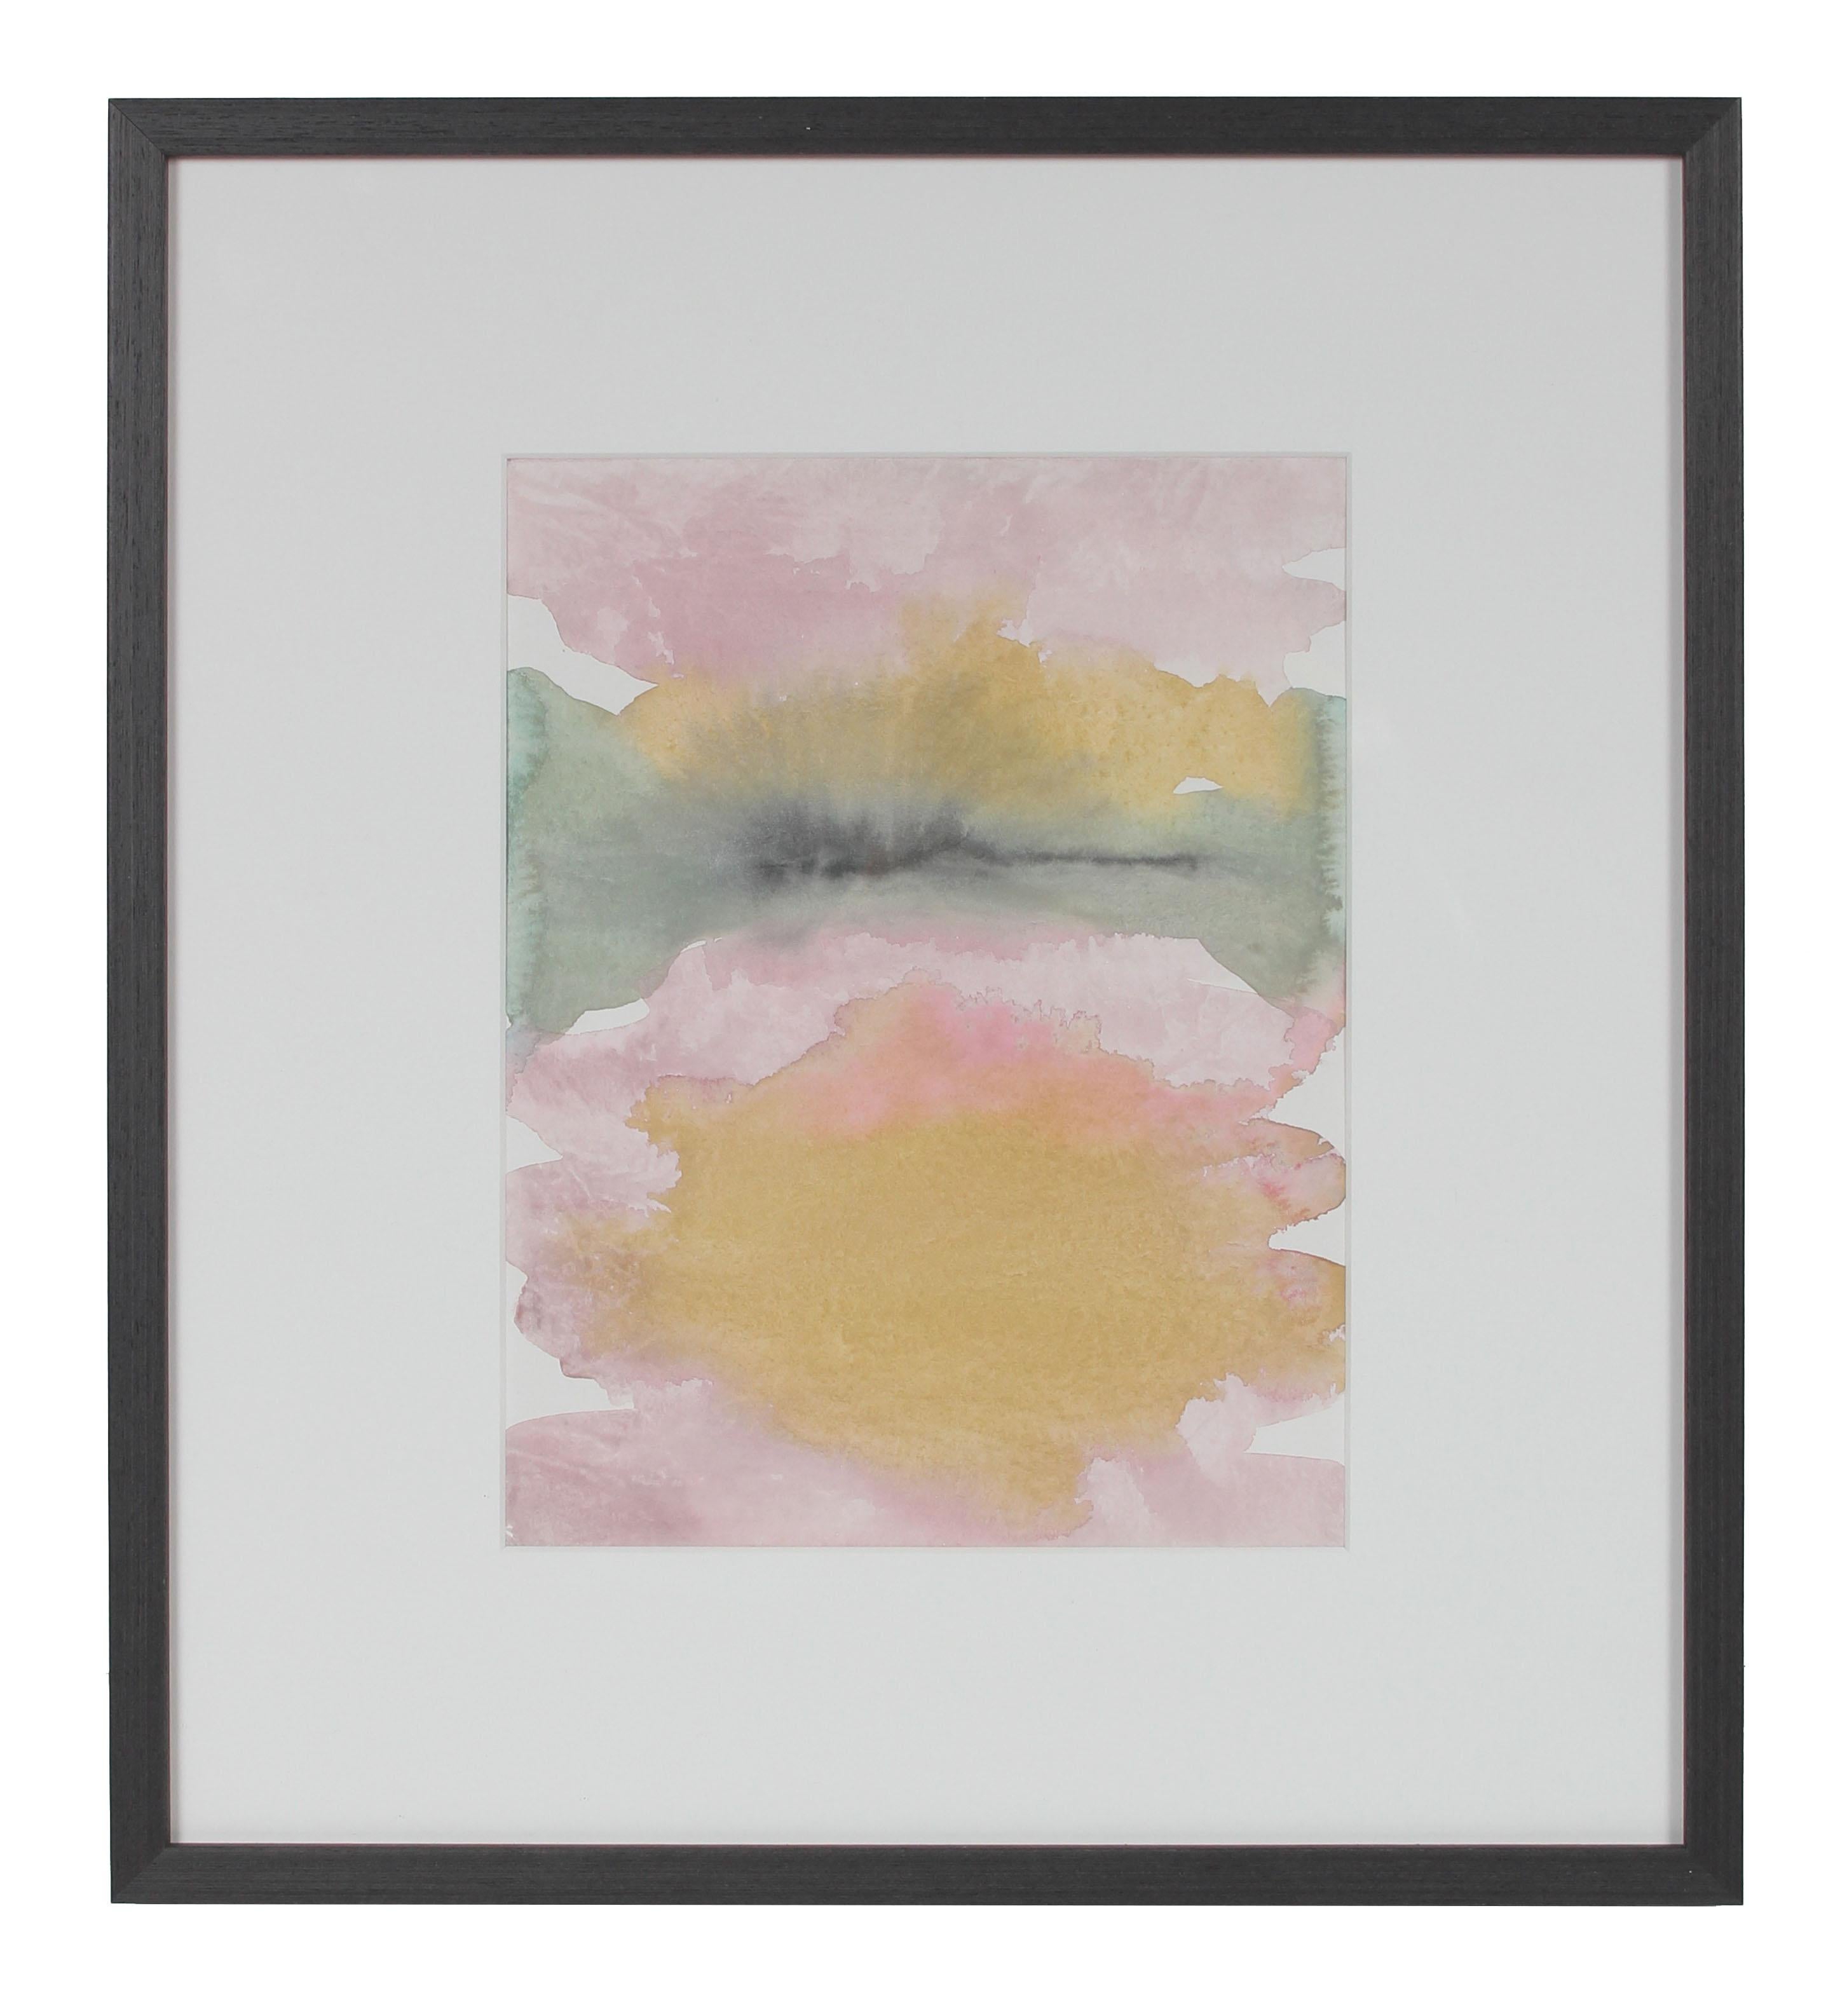 Rob Delamater Abstract Drawing - "A Storm in the Desert, Nevada" Pale Gouache Painting, 2017